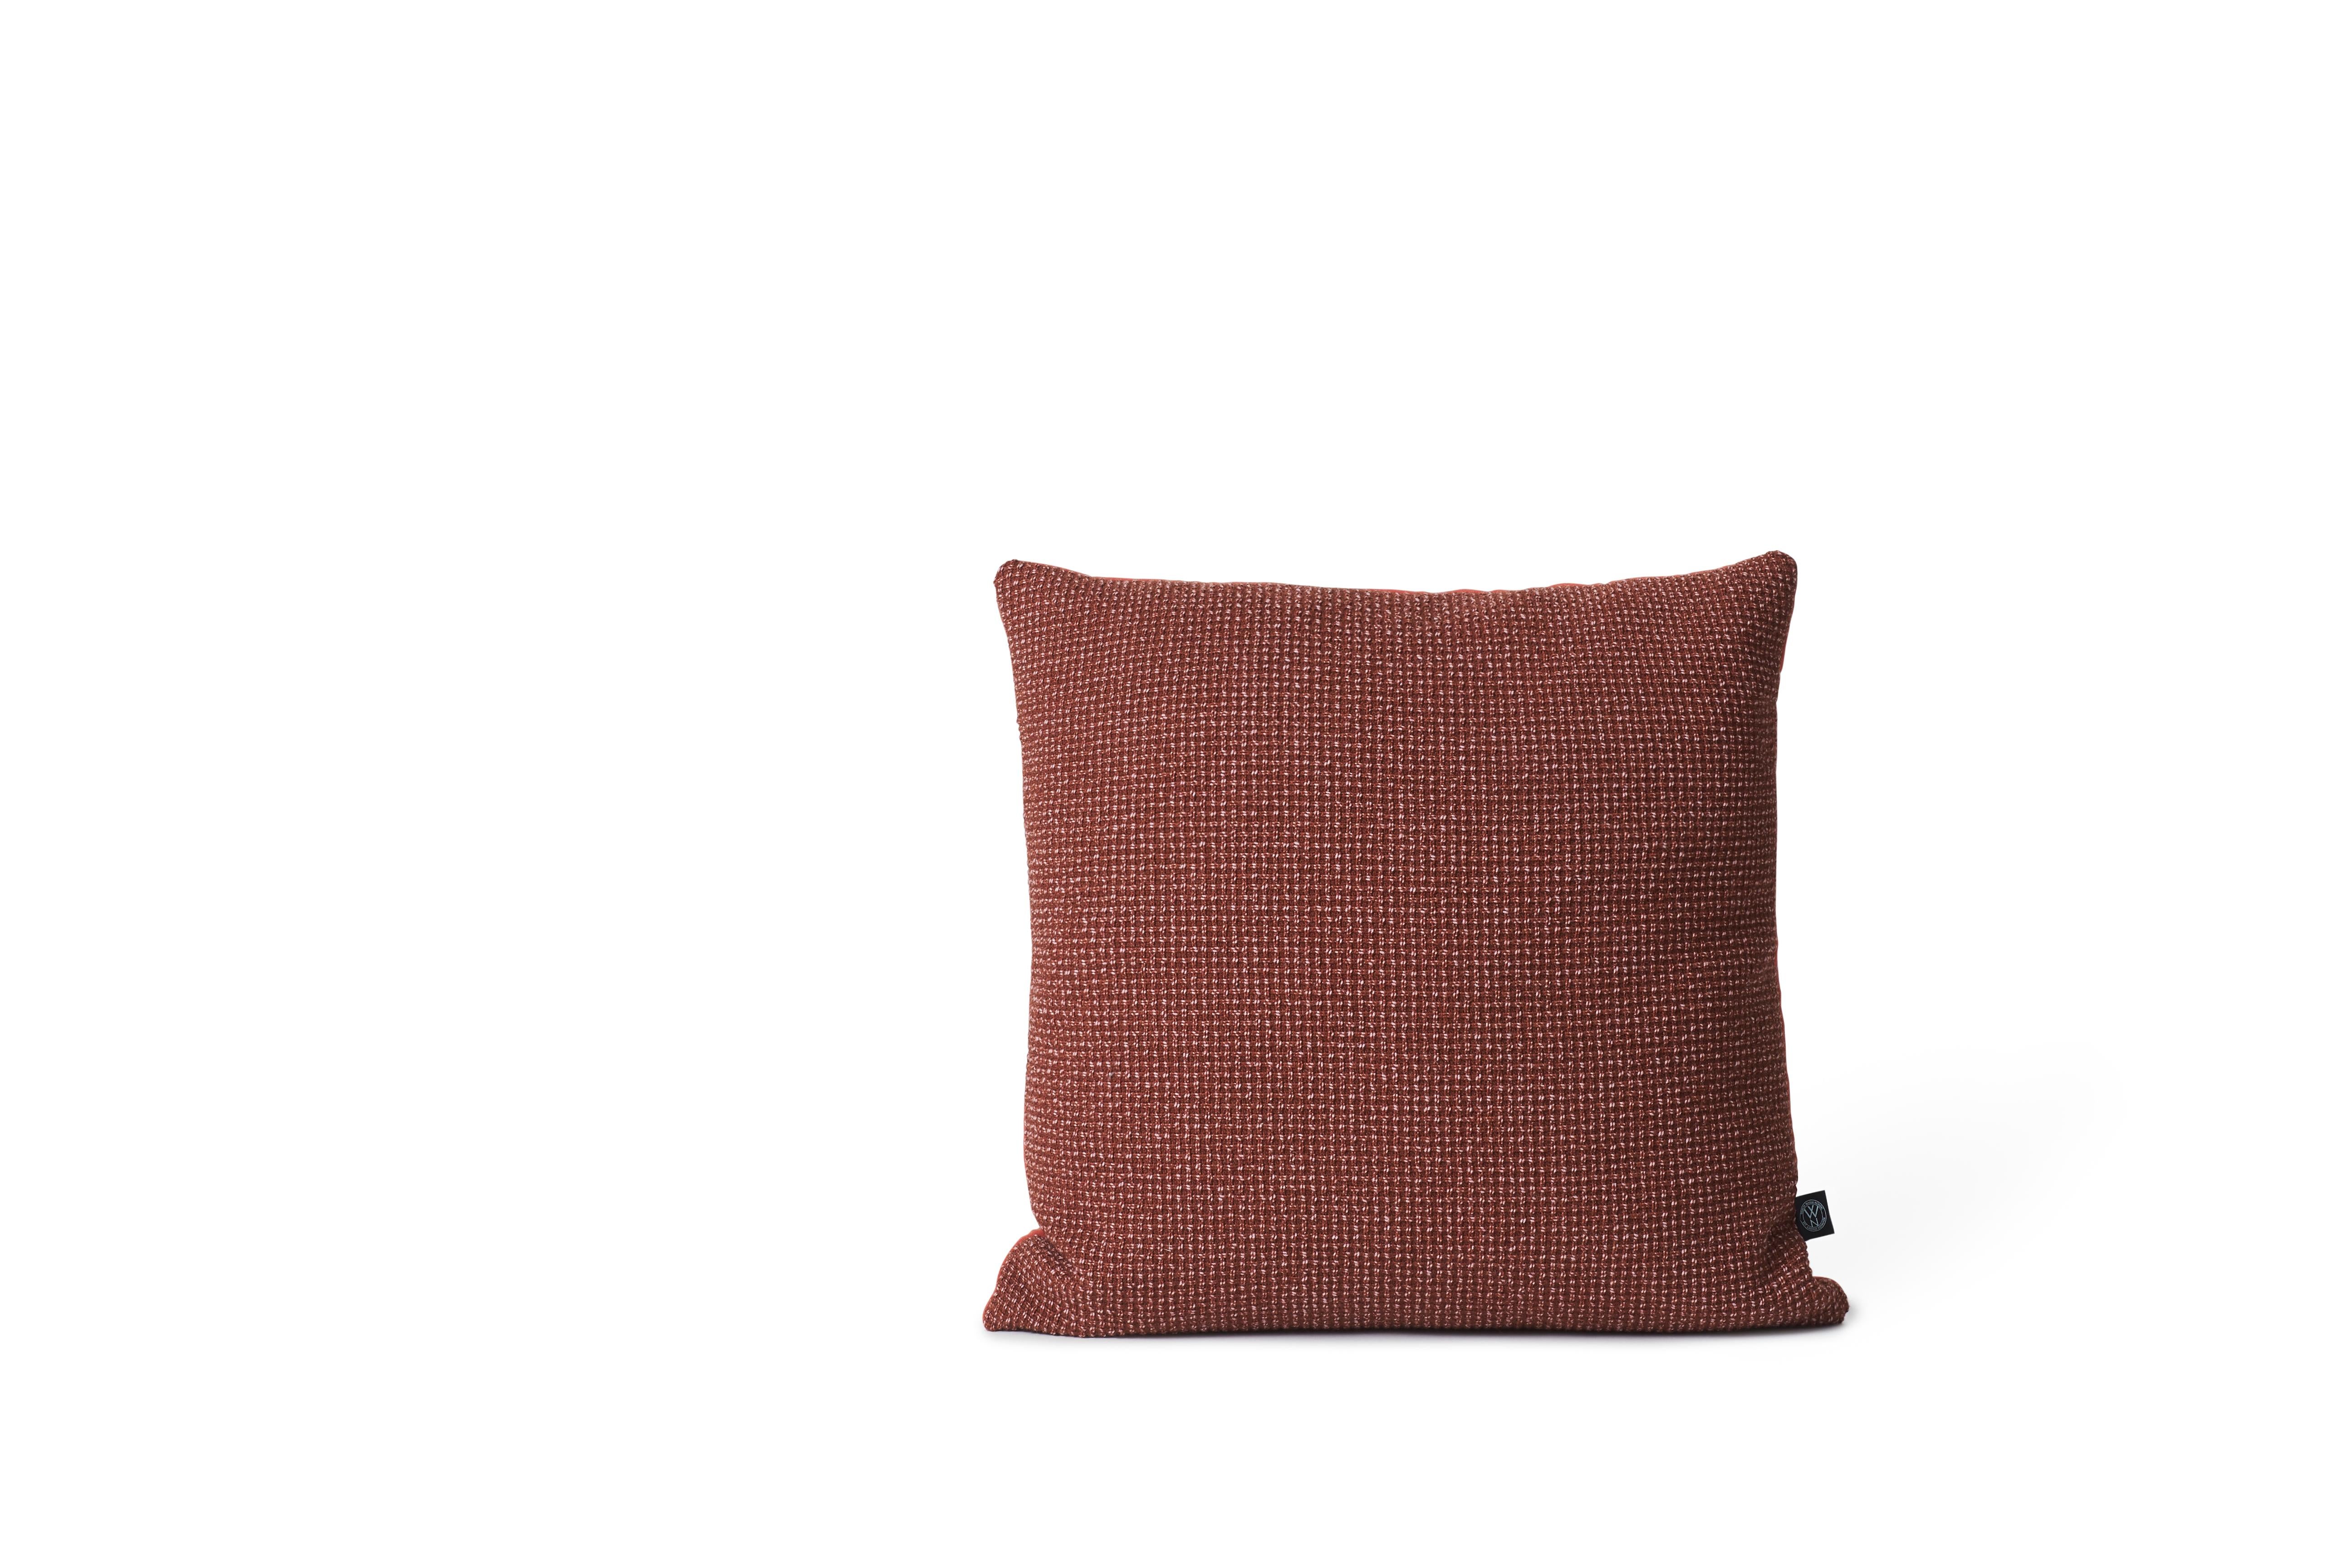 For Sale: Brown (Rusty) Moodify Square Cushion, by Warm Nordic 2